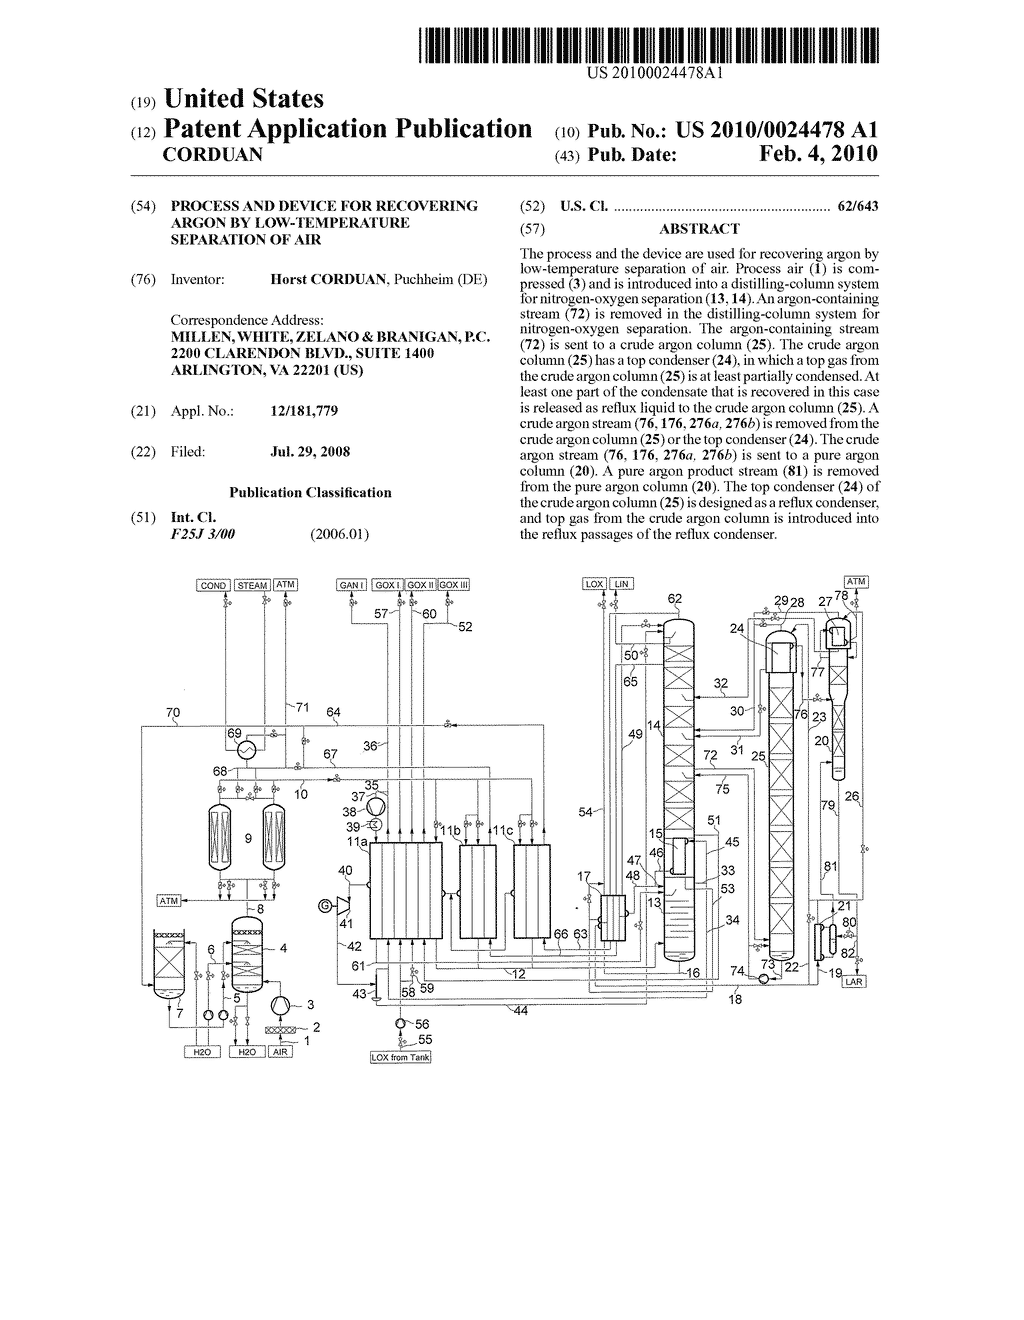 PROCESS AND DEVICE FOR RECOVERING ARGON BY LOW-TEMPERATURE SEPARATION OF AIR - diagram, schematic, and image 01